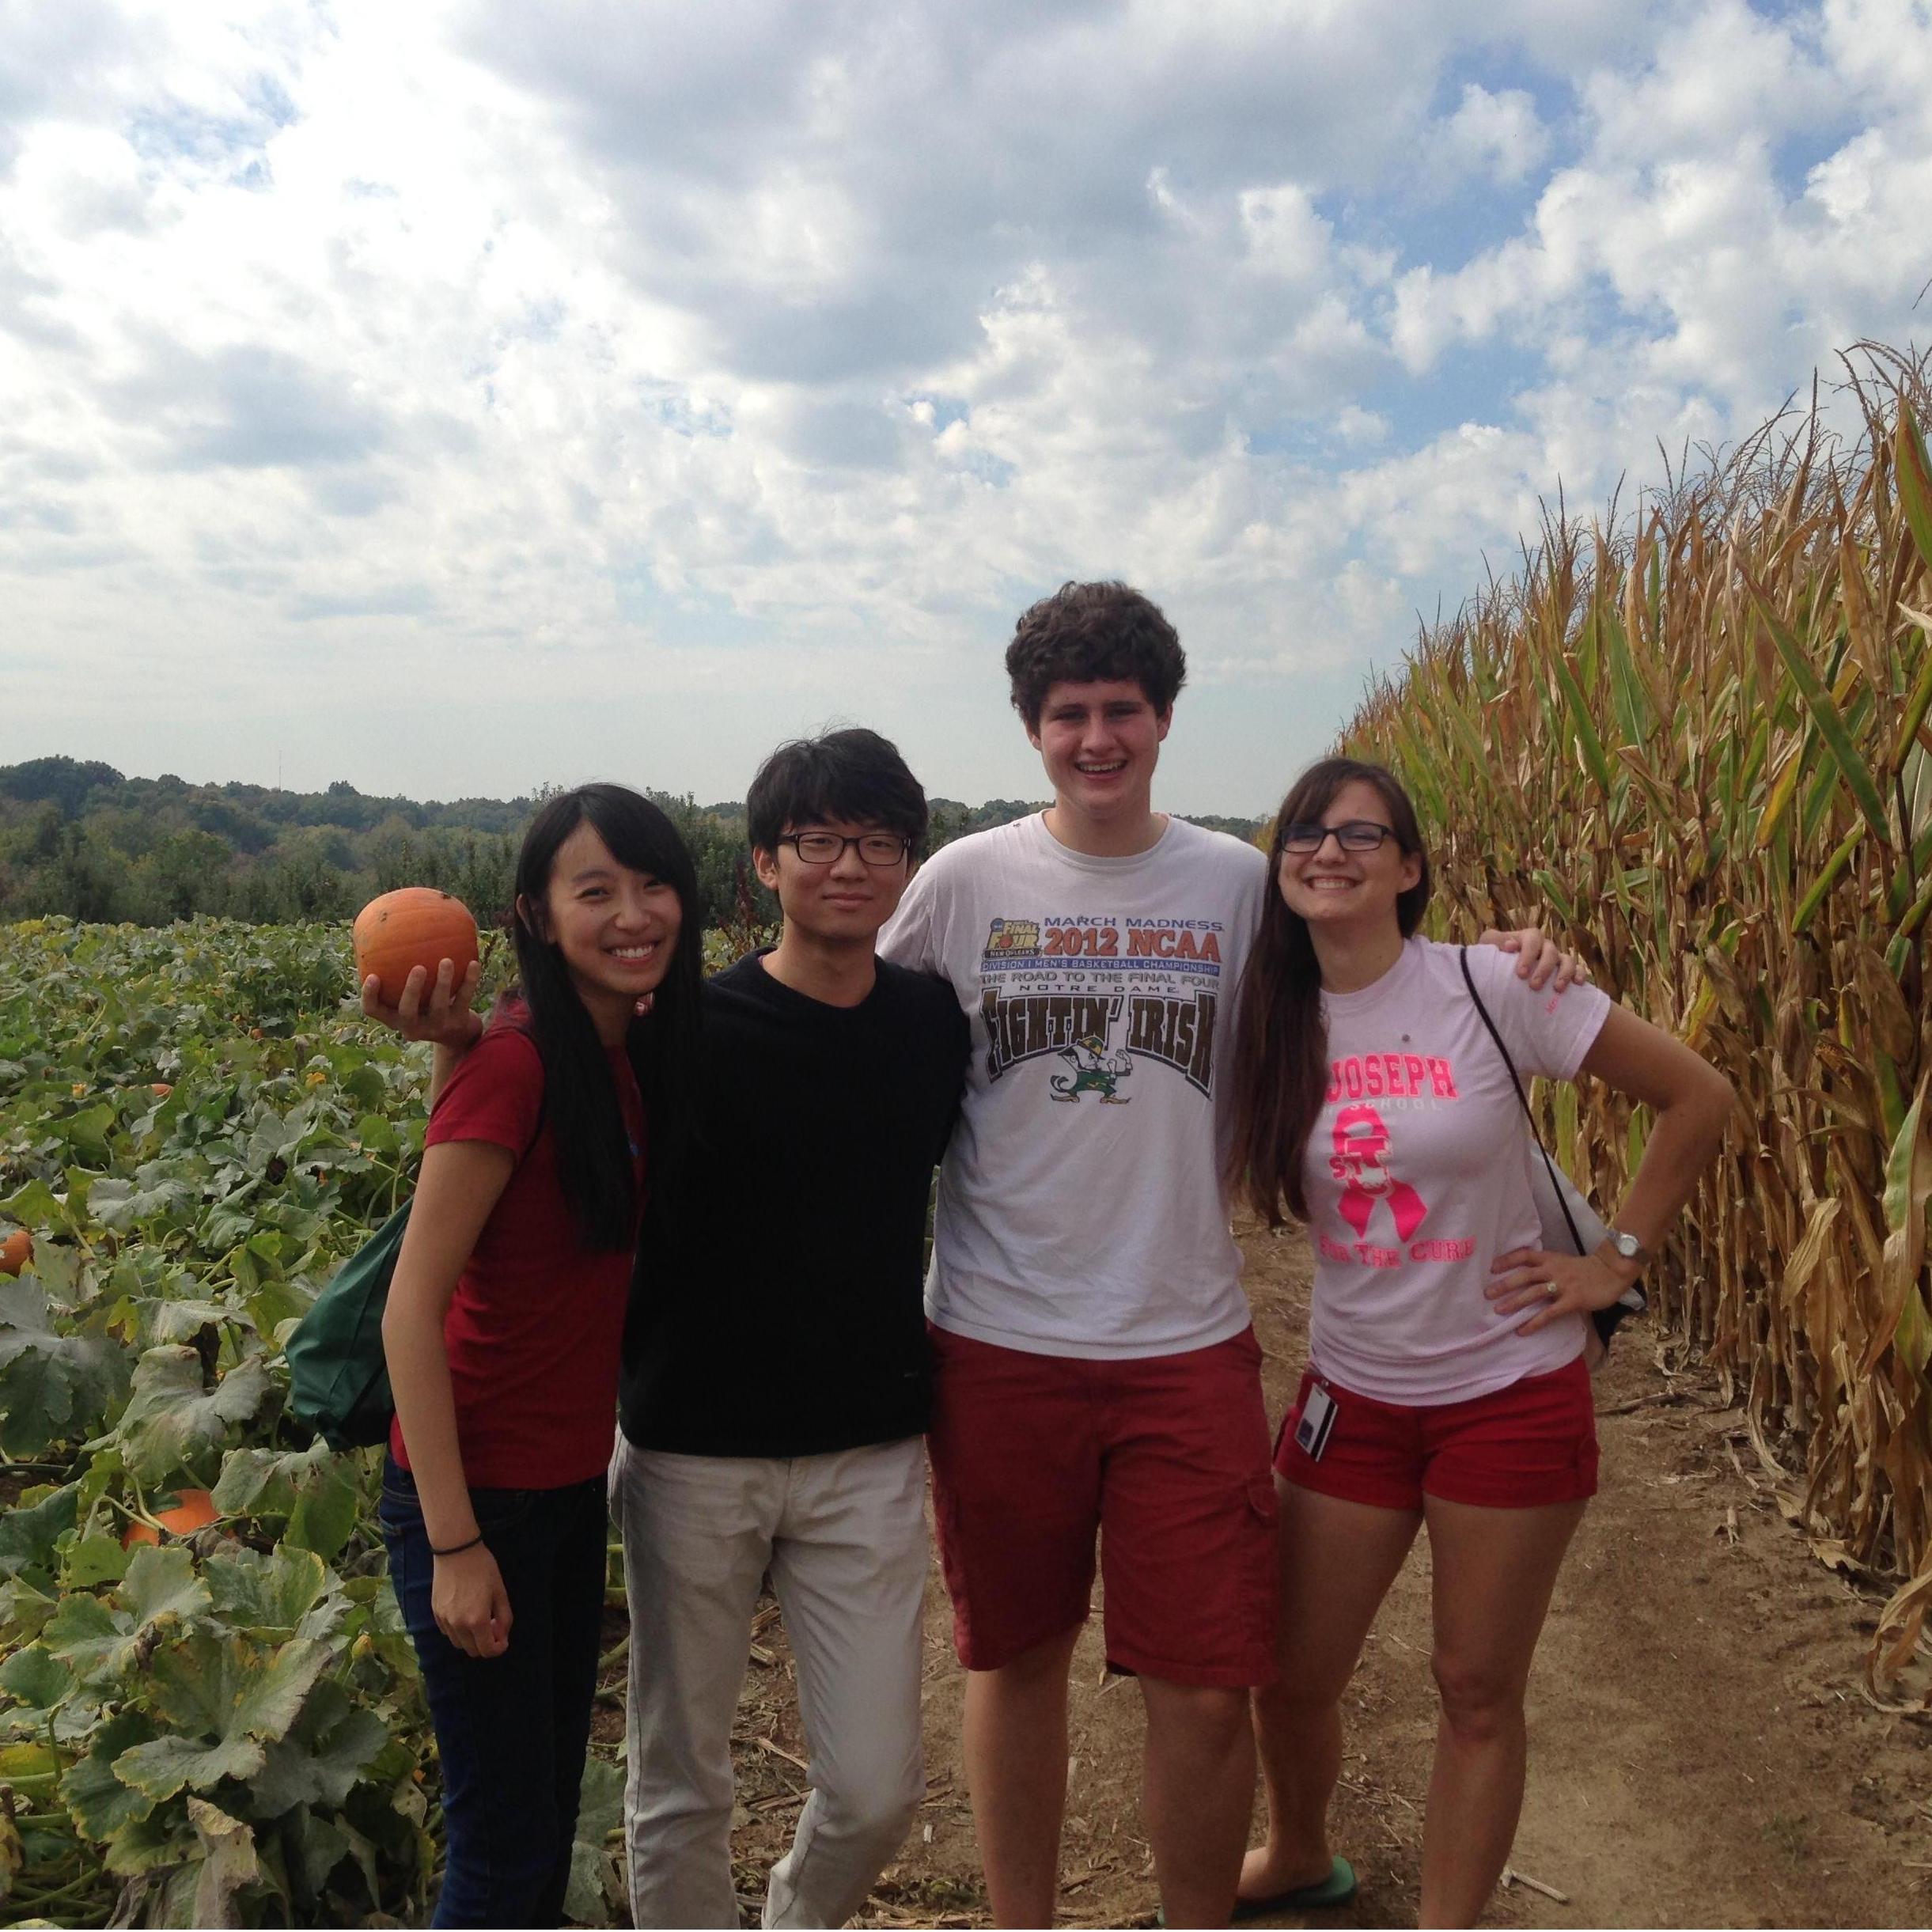 Our very first photo together: 2013! John had just joined our college acapella group, More Fools Than Wise. We took a trip out to the pumpkin patch for some Fall fun!